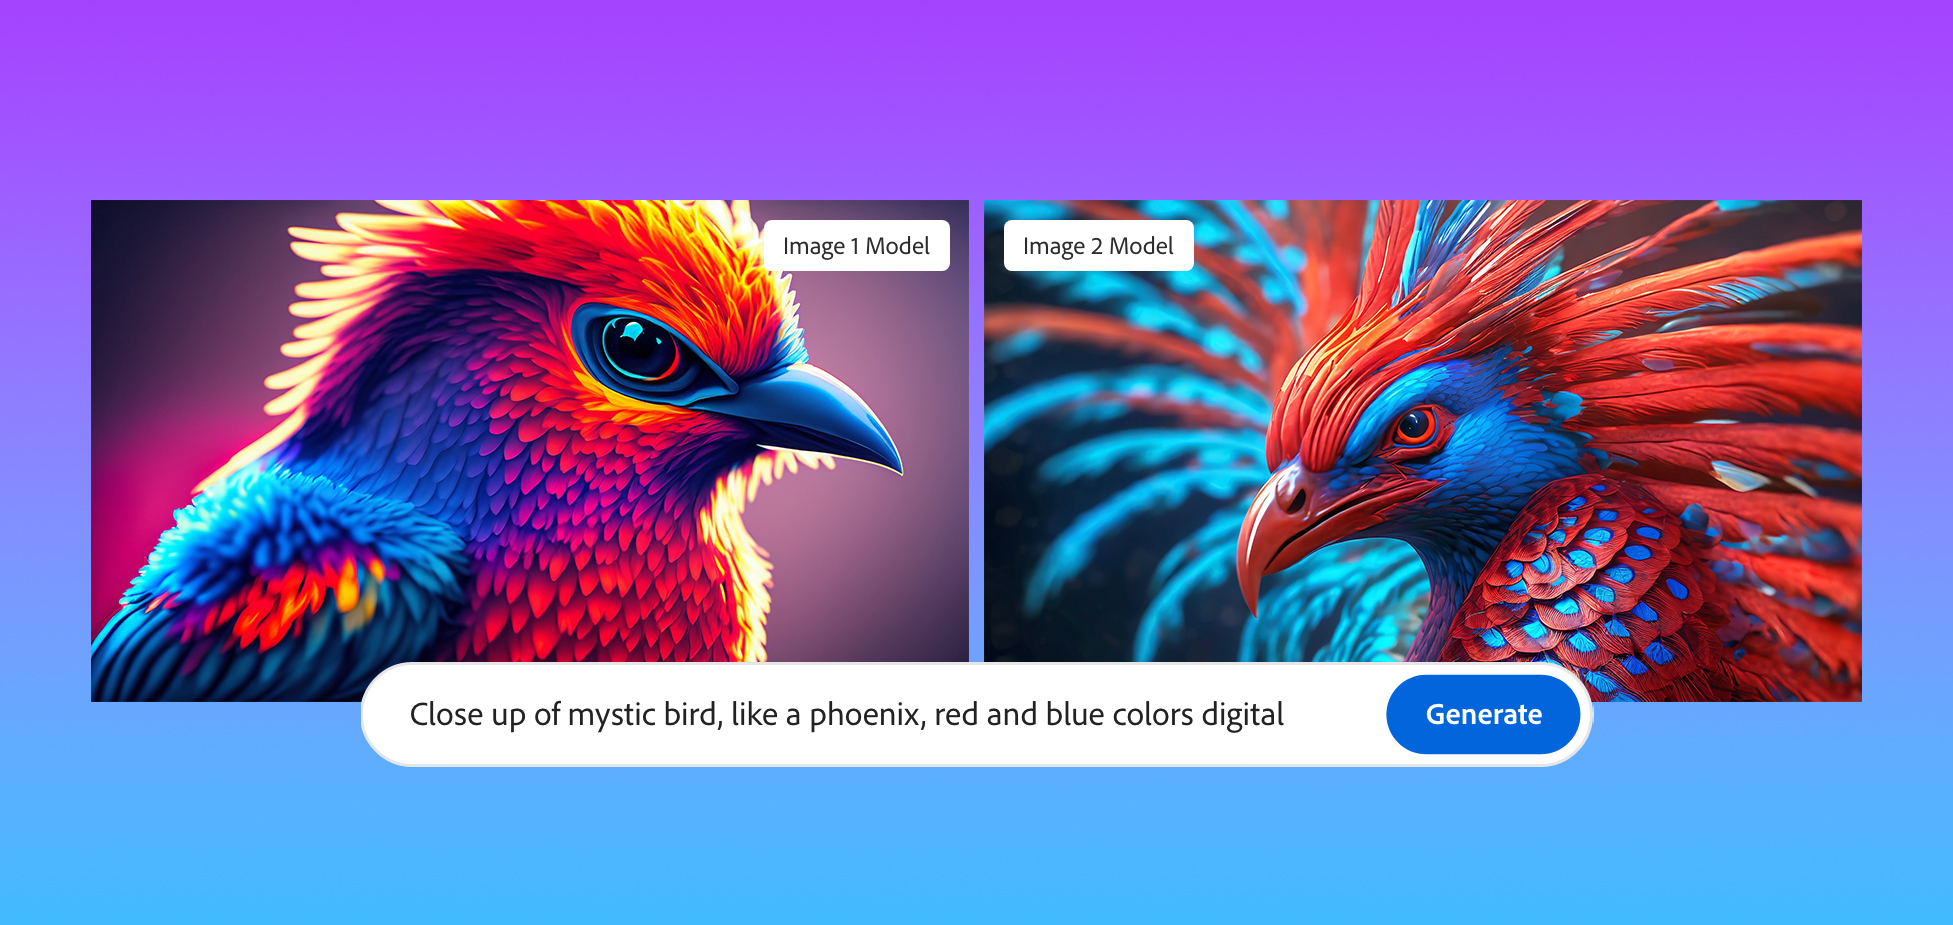 Image 1 vs Image 2 models in terms of brightly colored blue-red bird images.